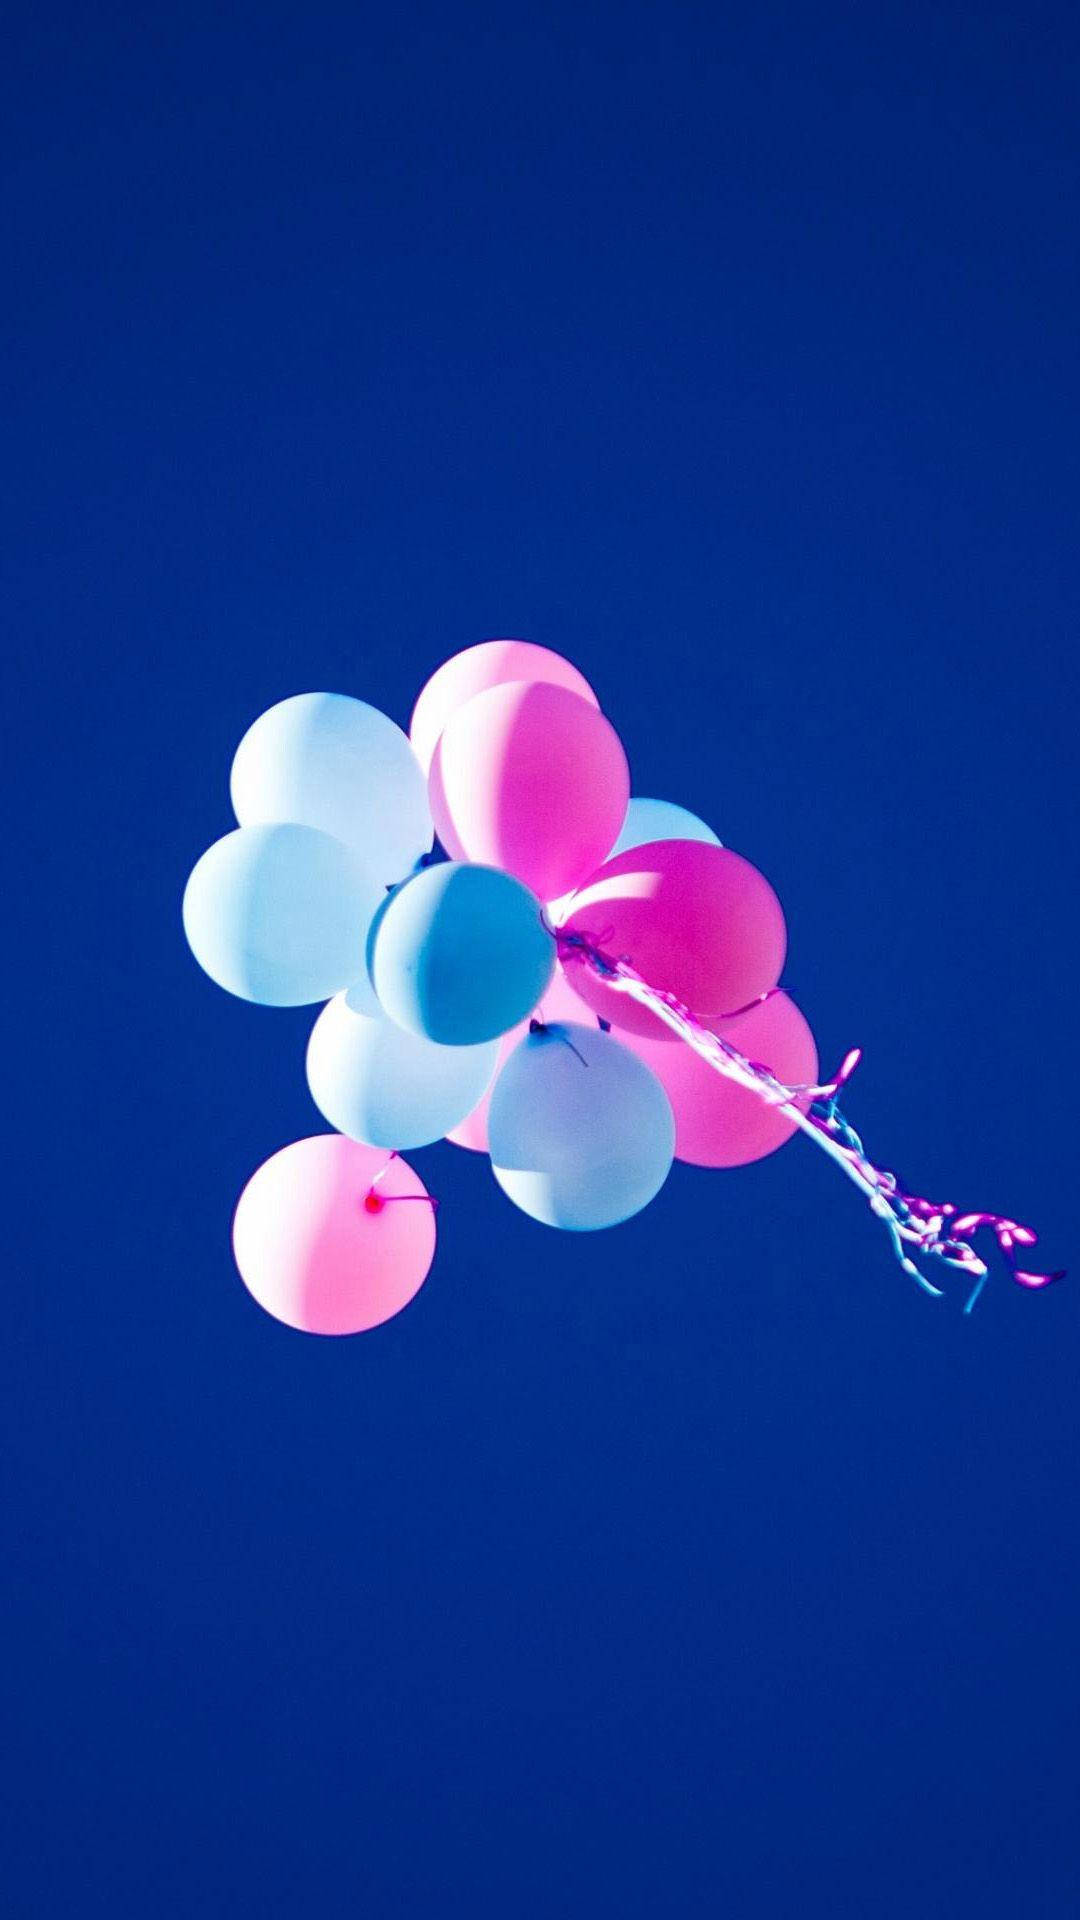 Pink And Blue Balloons